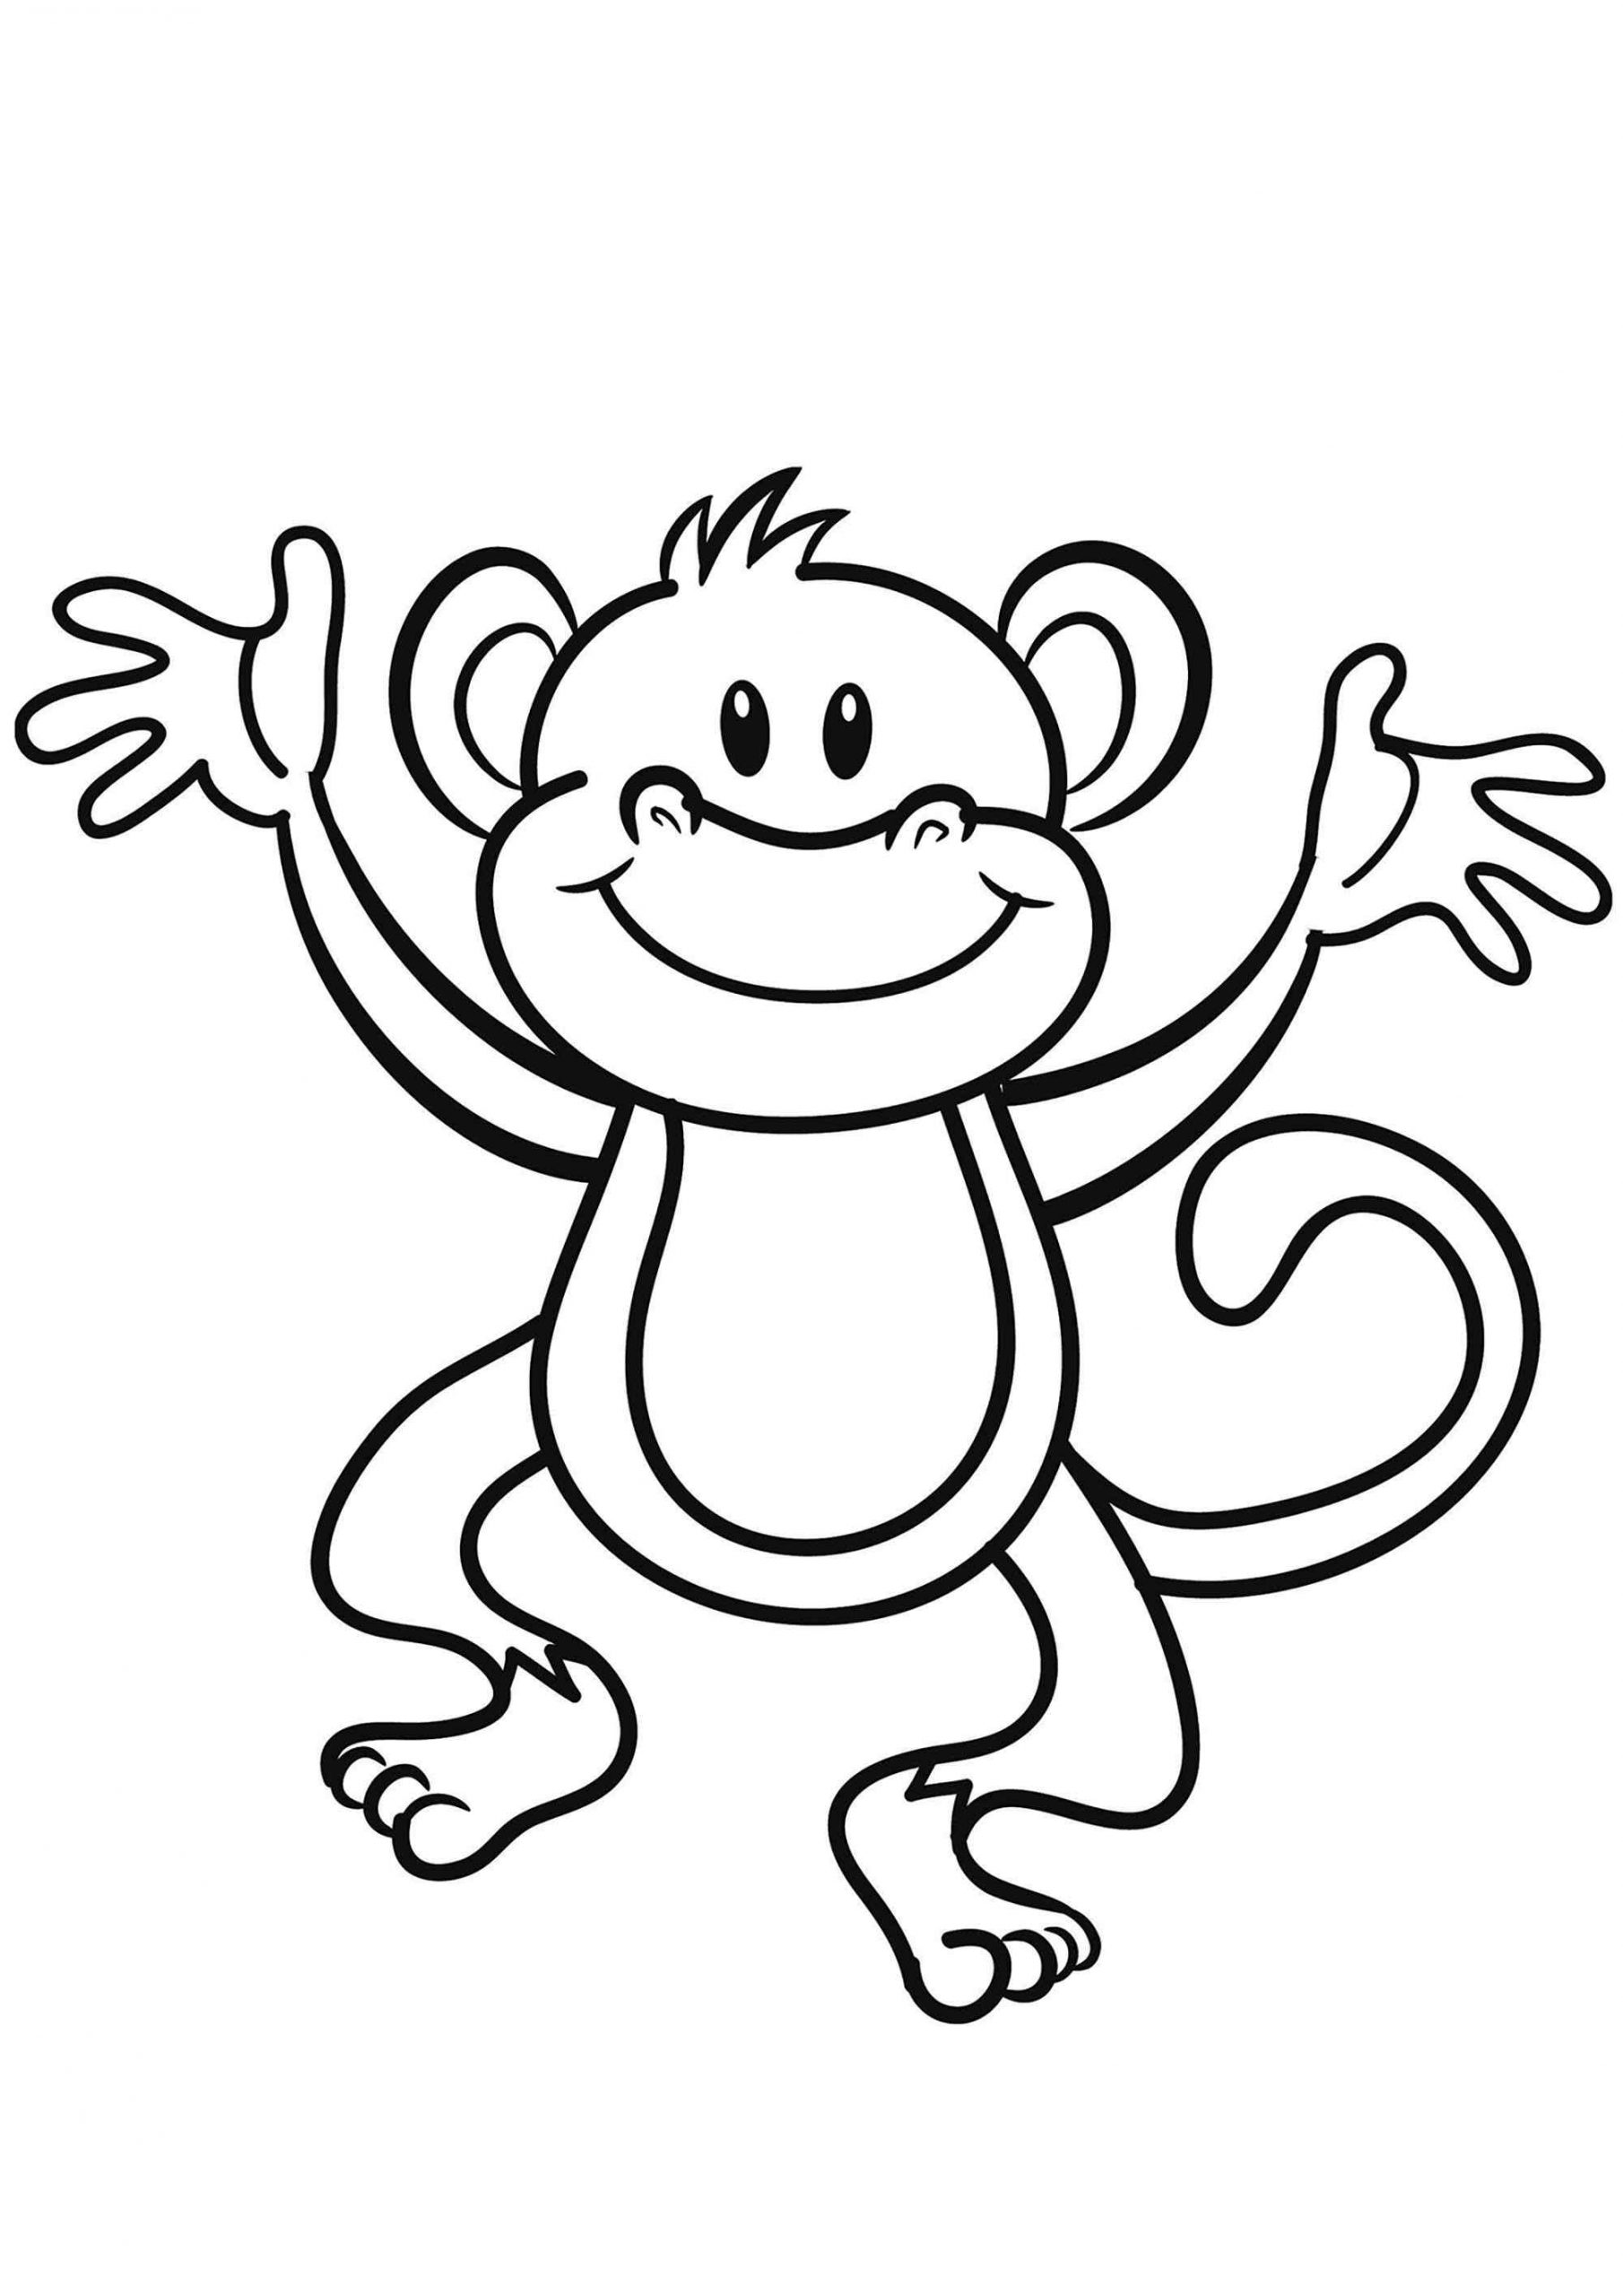 Amazing Monkey For Kids Coloring Page